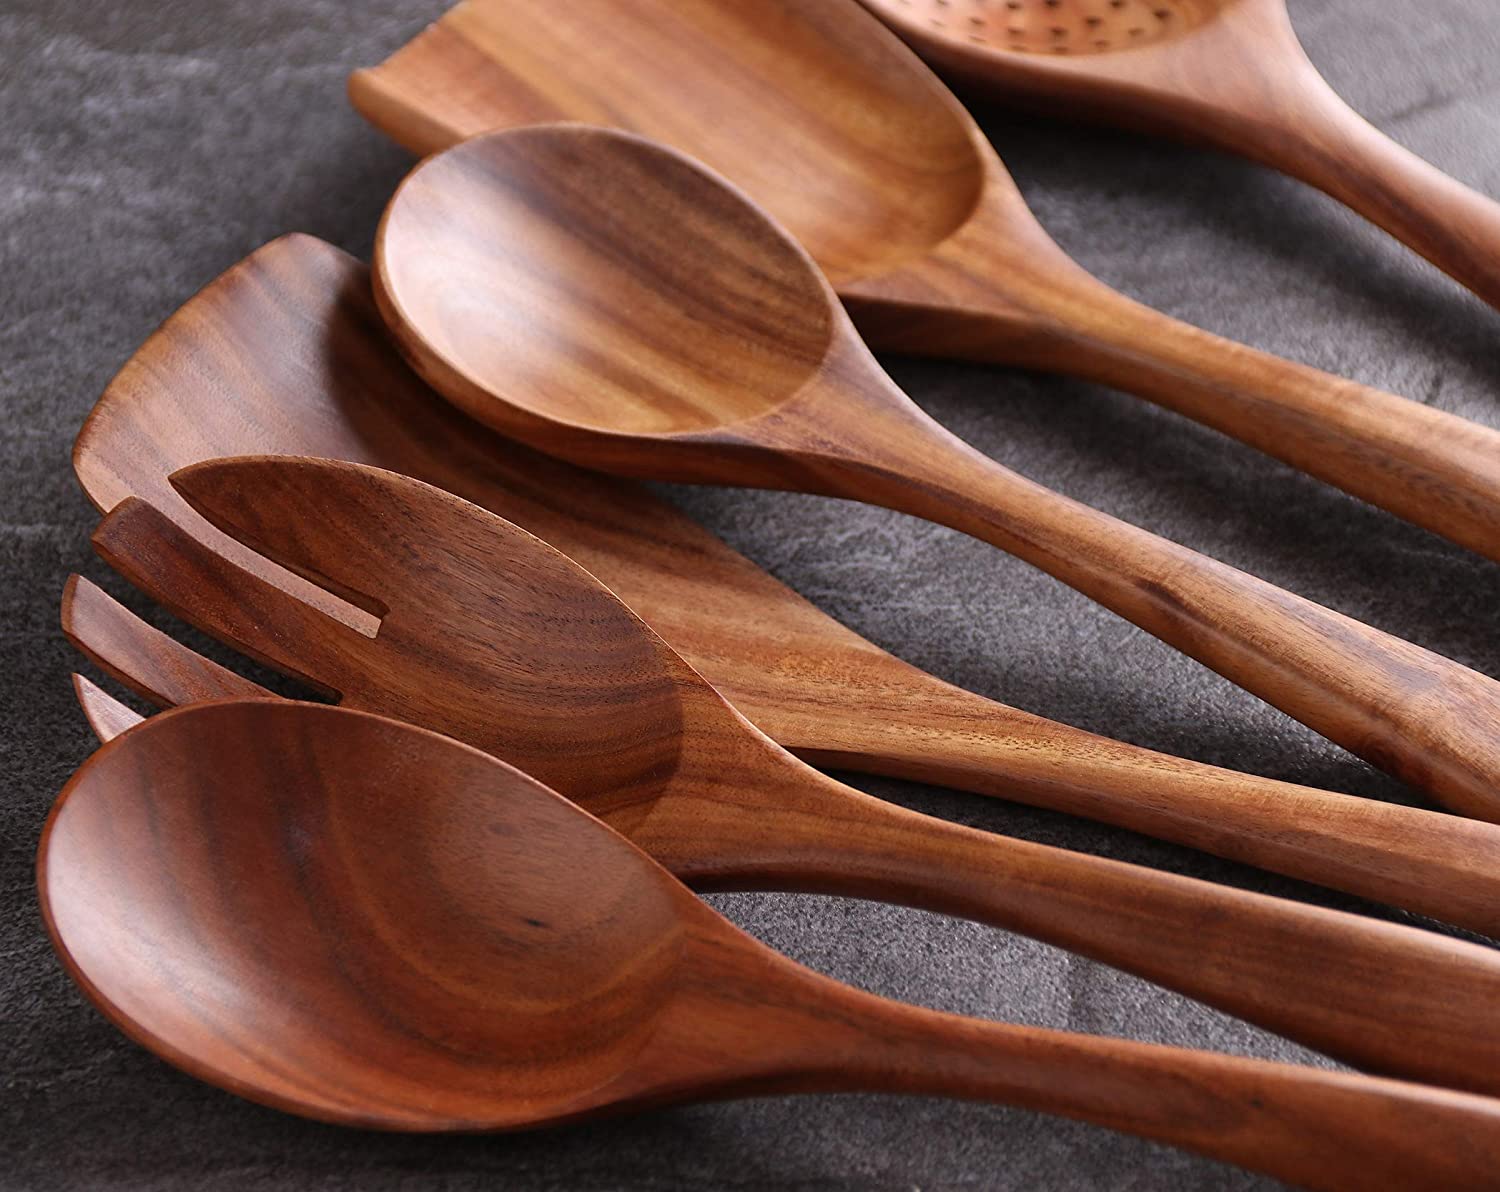 Wooden Utensils For Cooking,11 Pcs Wooden Spoons For Cooking, Teak